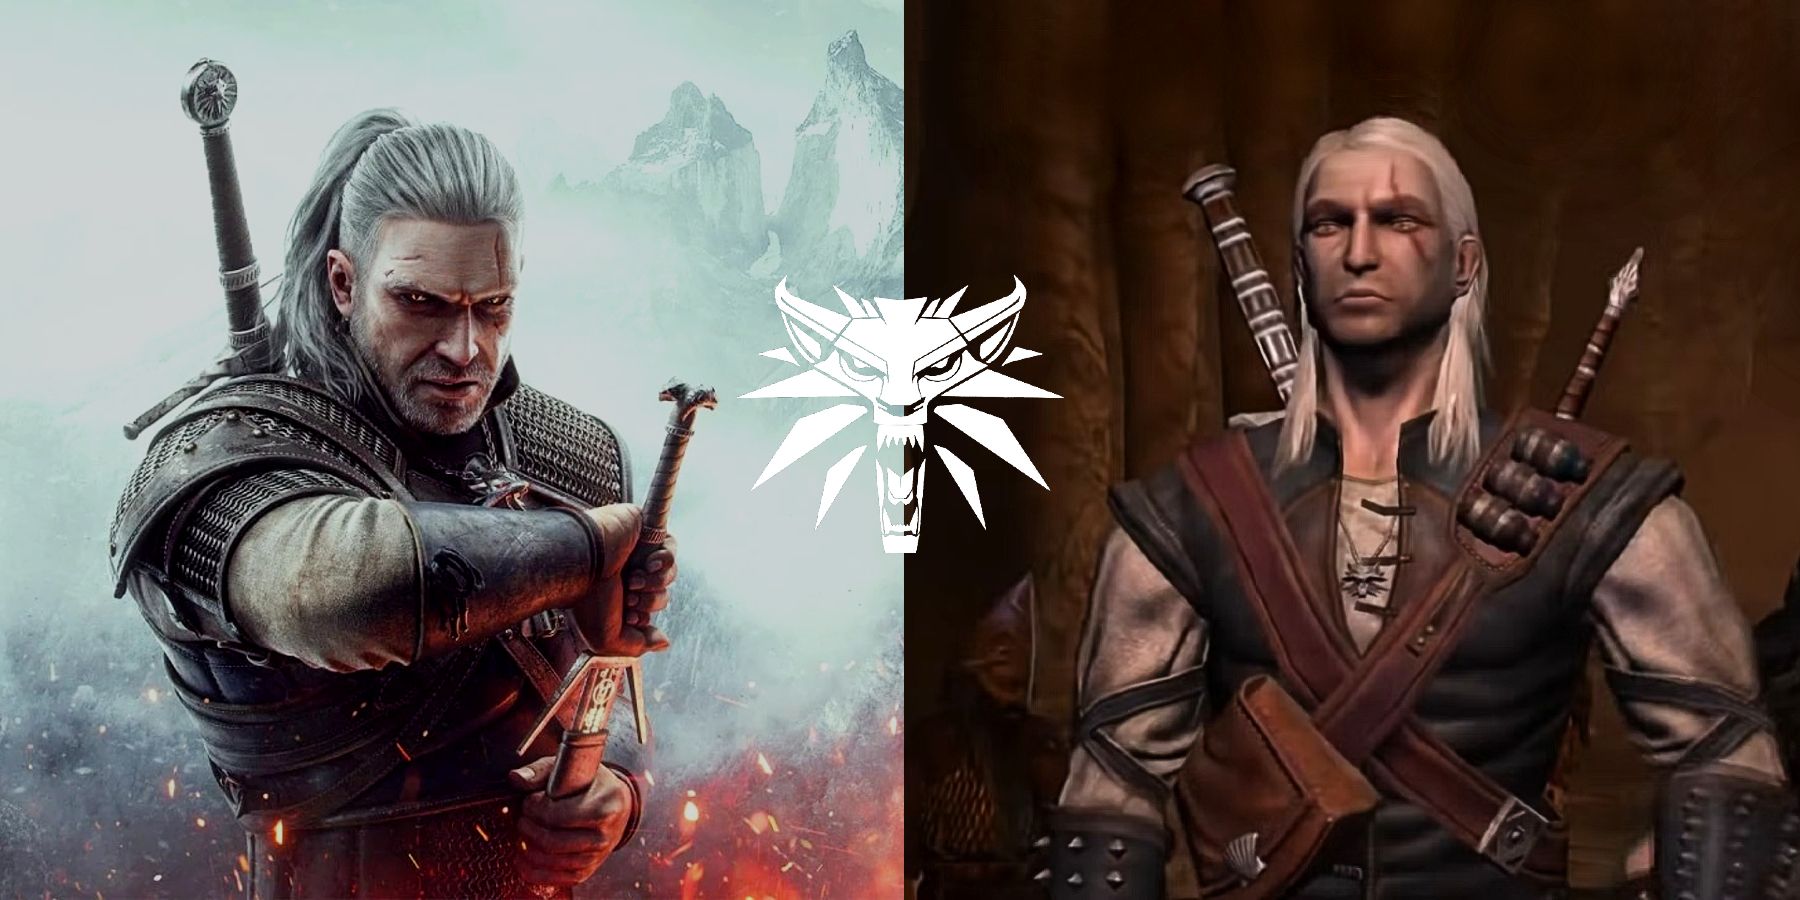 How The Witcher 1 opening hour looks remade in The Witcher 3